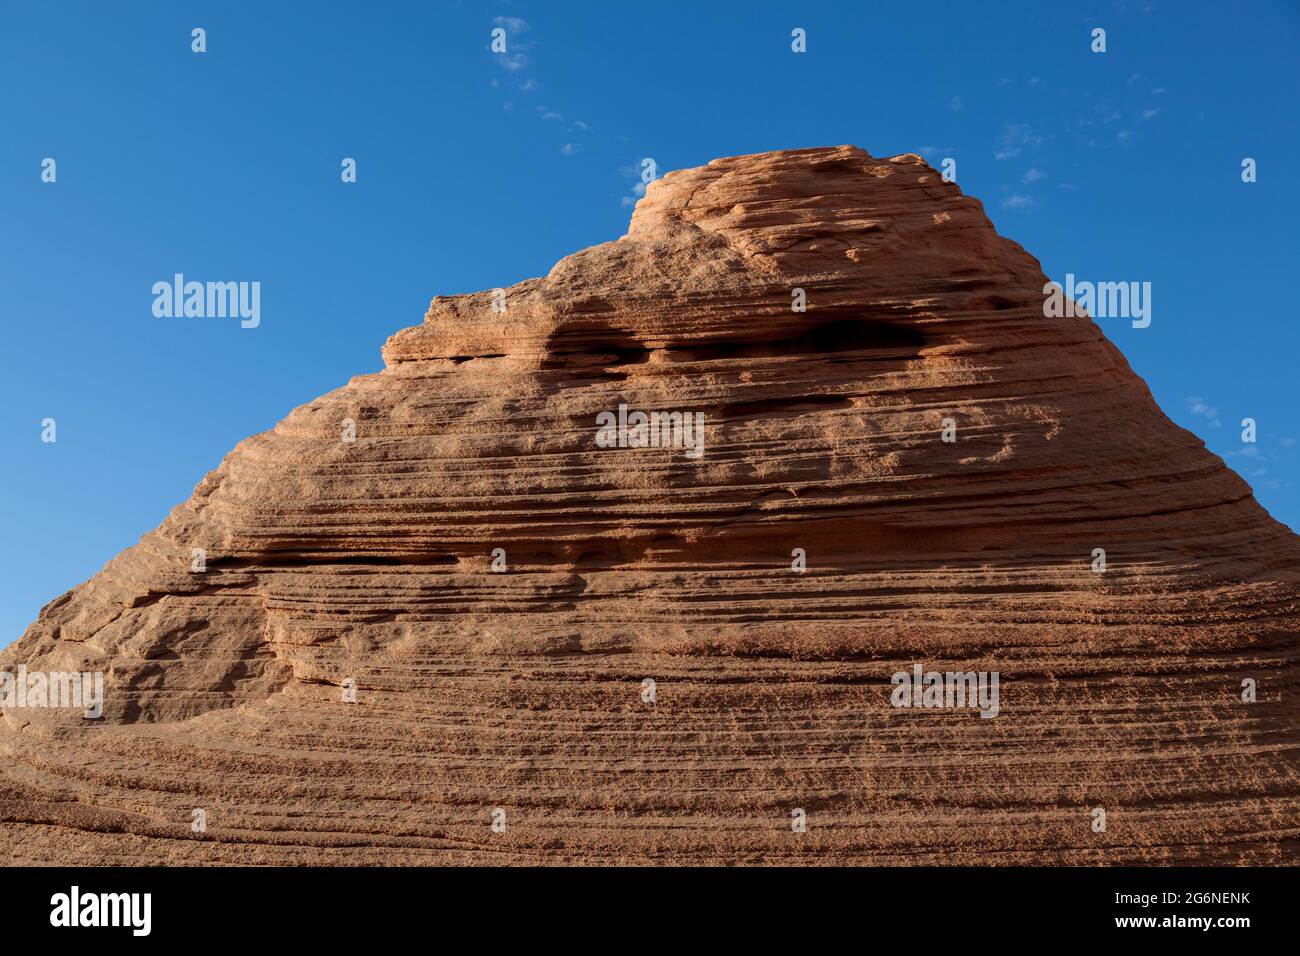 Use your imagination to find the famous face in this eroded sandstone hill at the Page Shores Amphitheater near Page, Arizona. Stock Photo